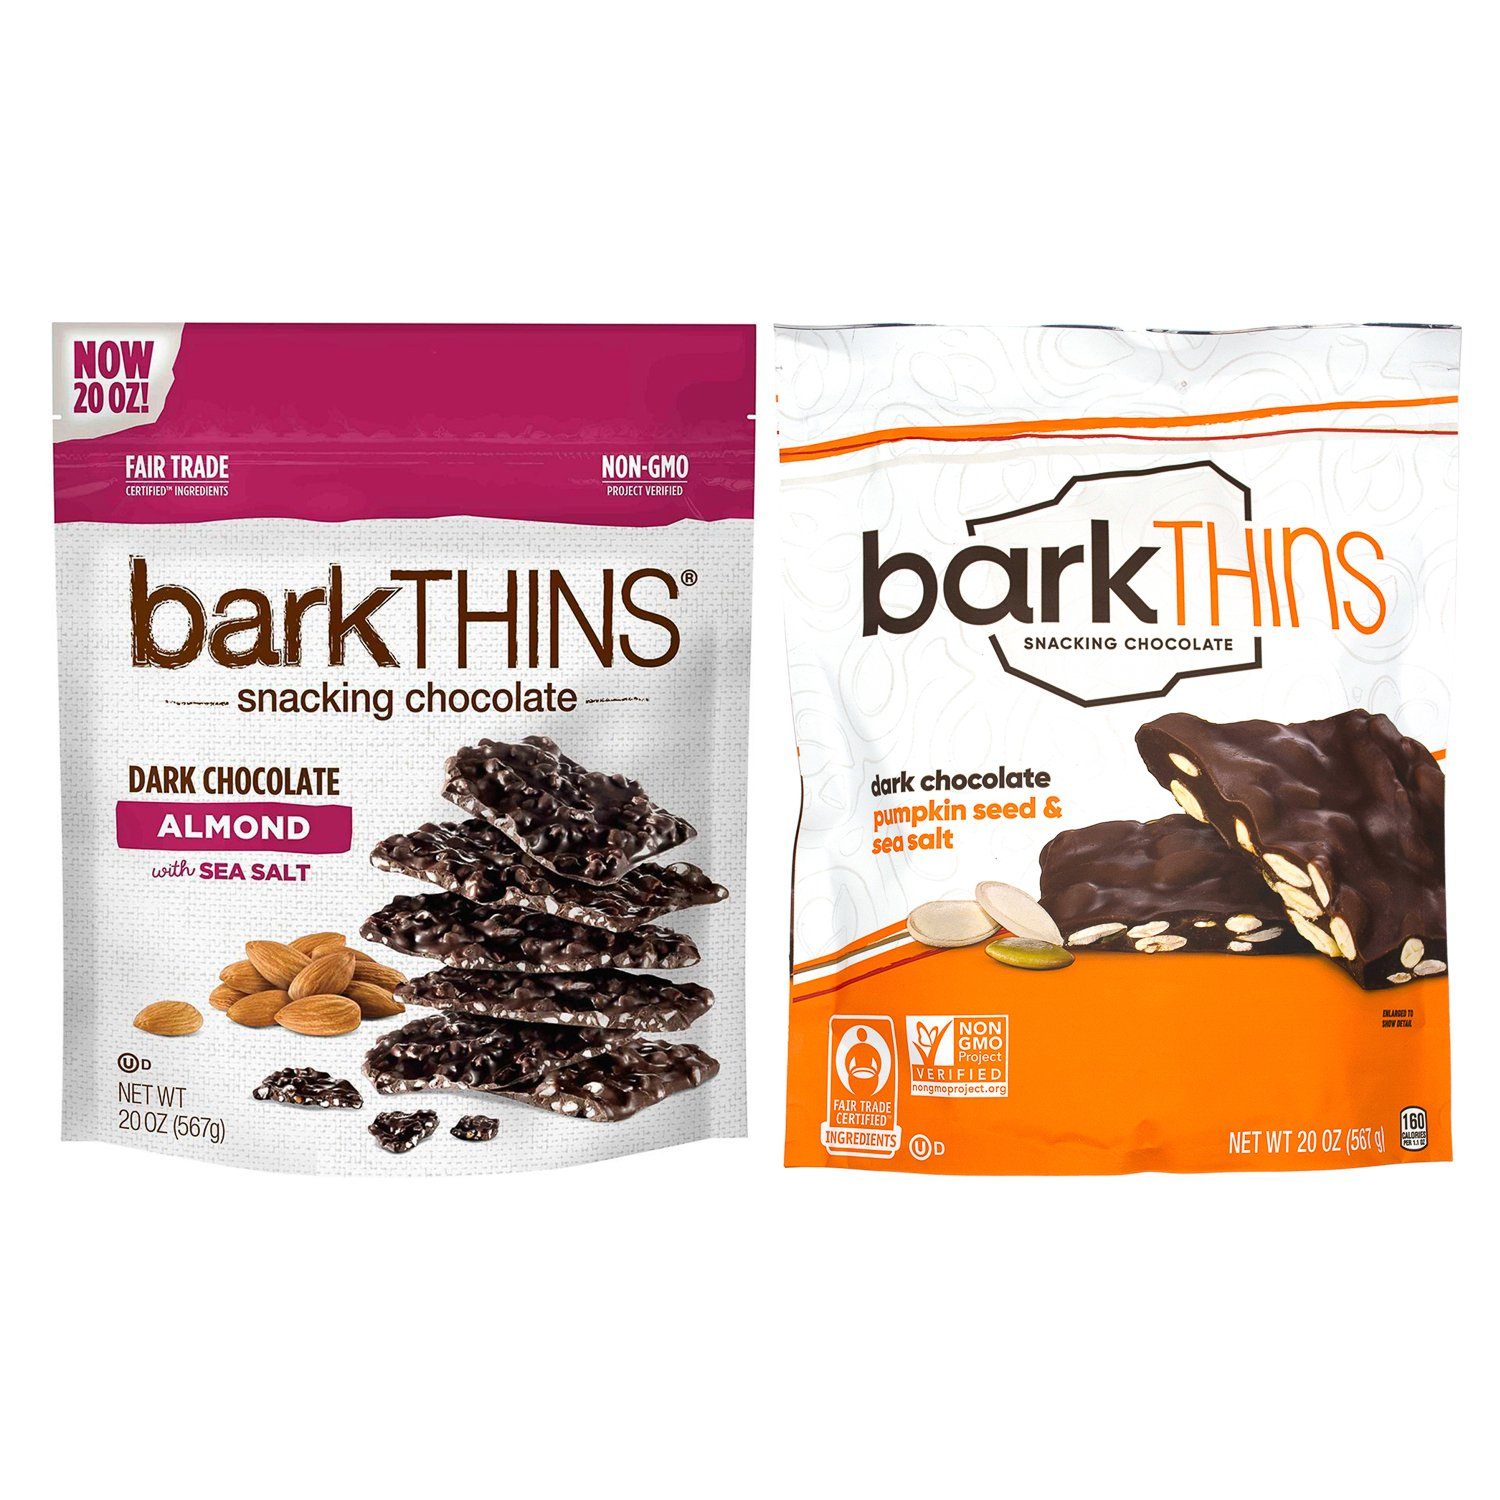 Calories in 2 piece(s) of BarkThins - Chocolate Coconut w/ Almonds.